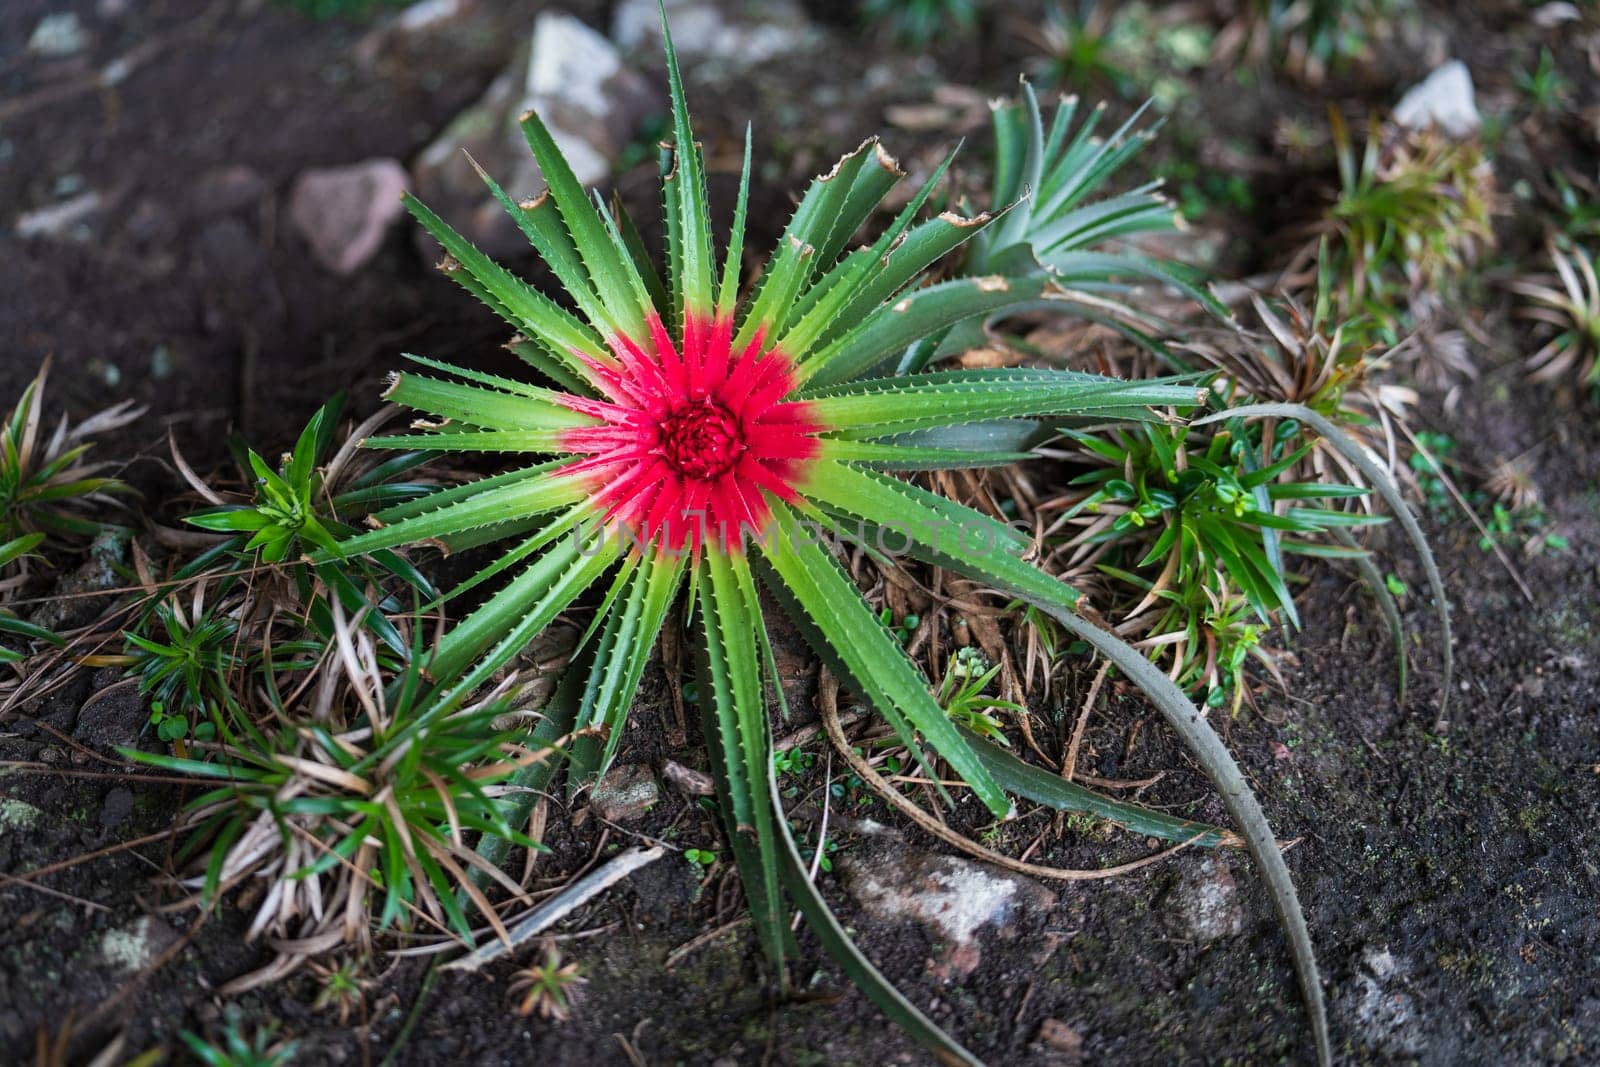 Close-up photo of a red bromeliad amid green leaves in nature.